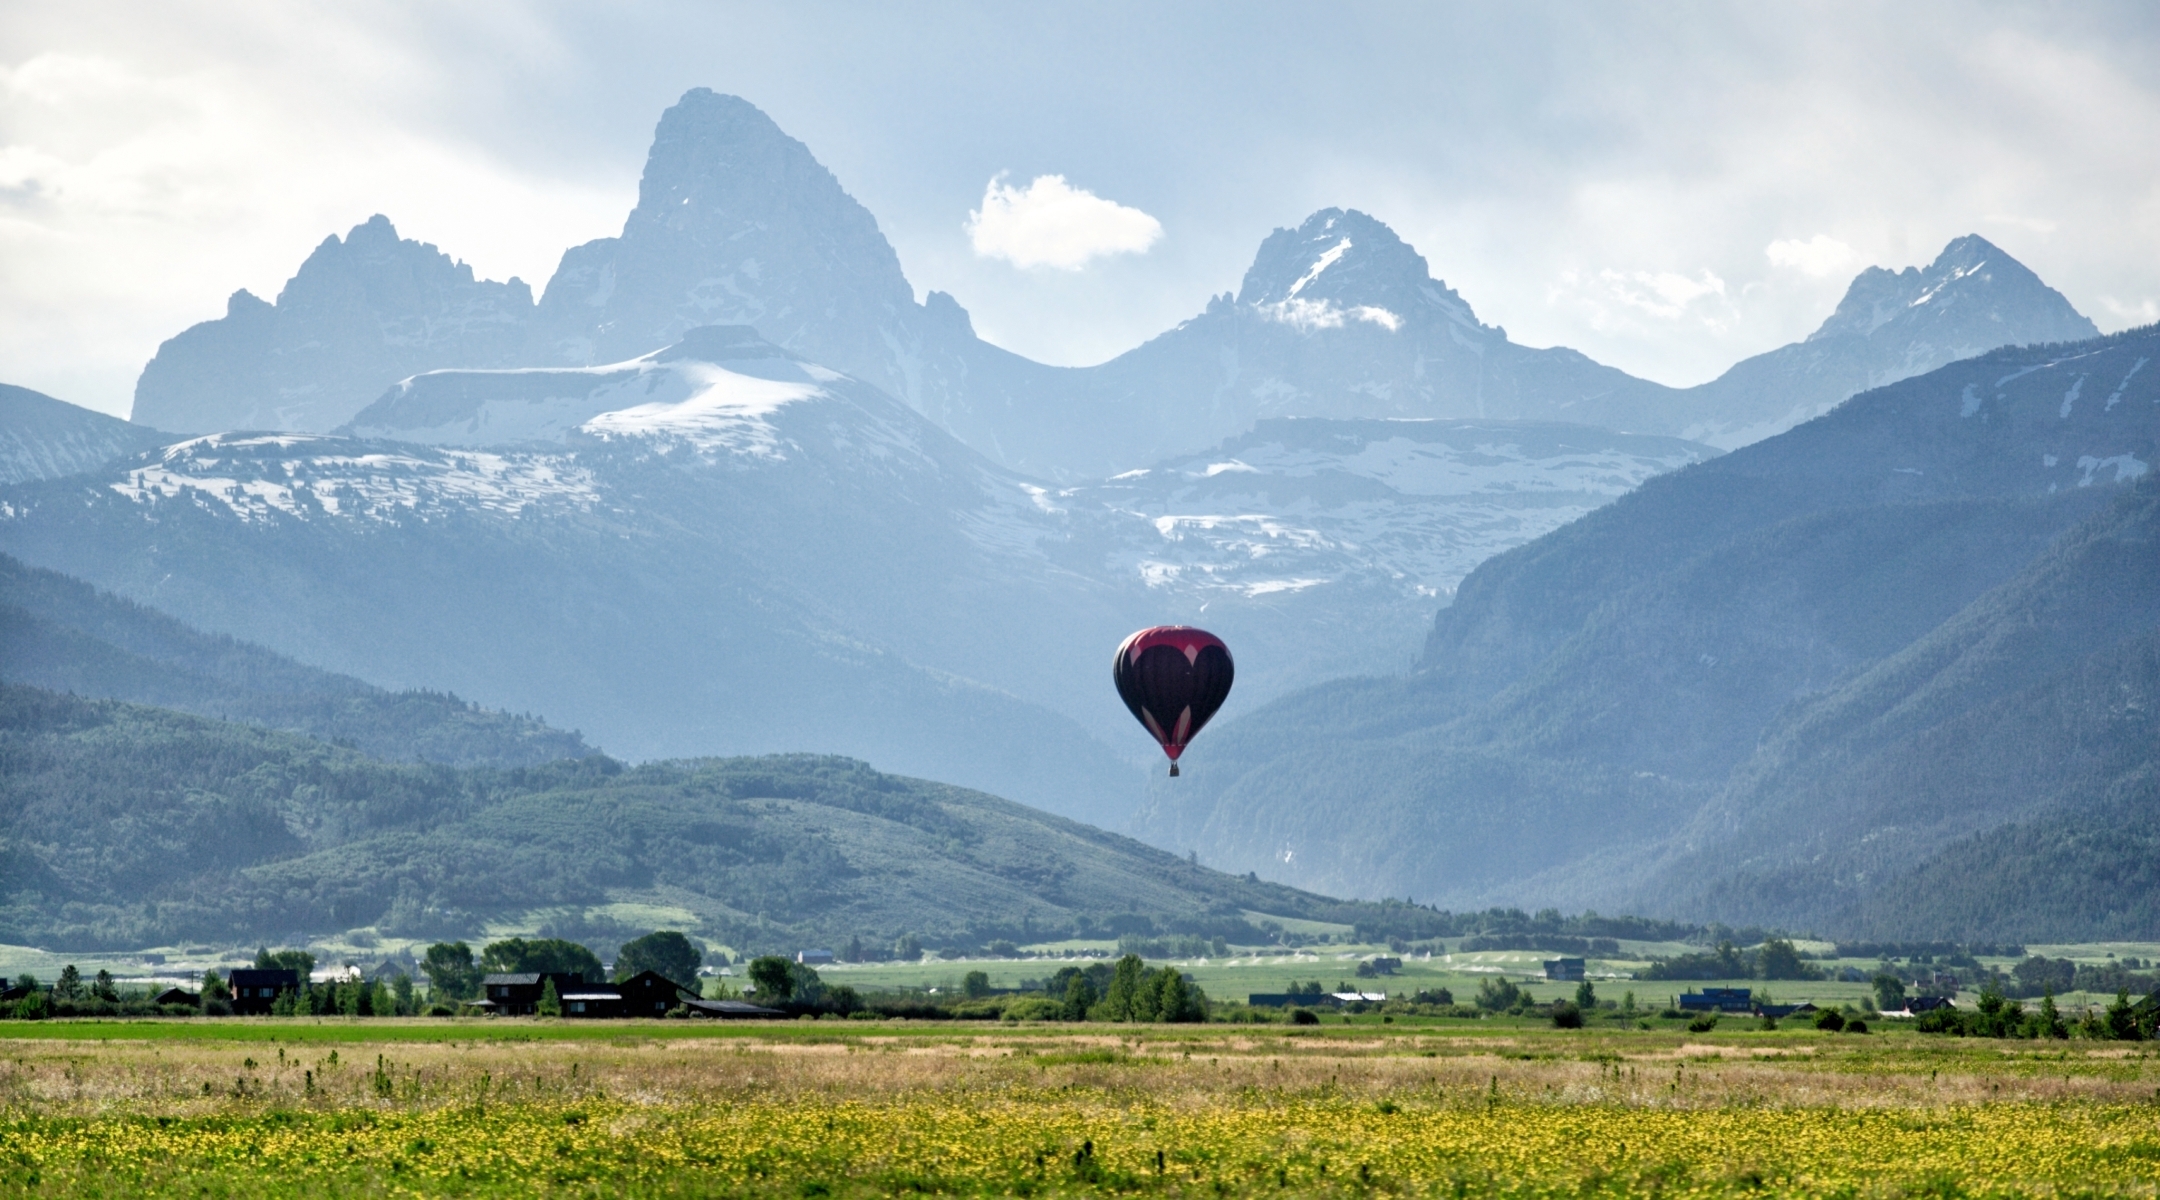 Mountains and a hot air balloon in a valley in Idaho